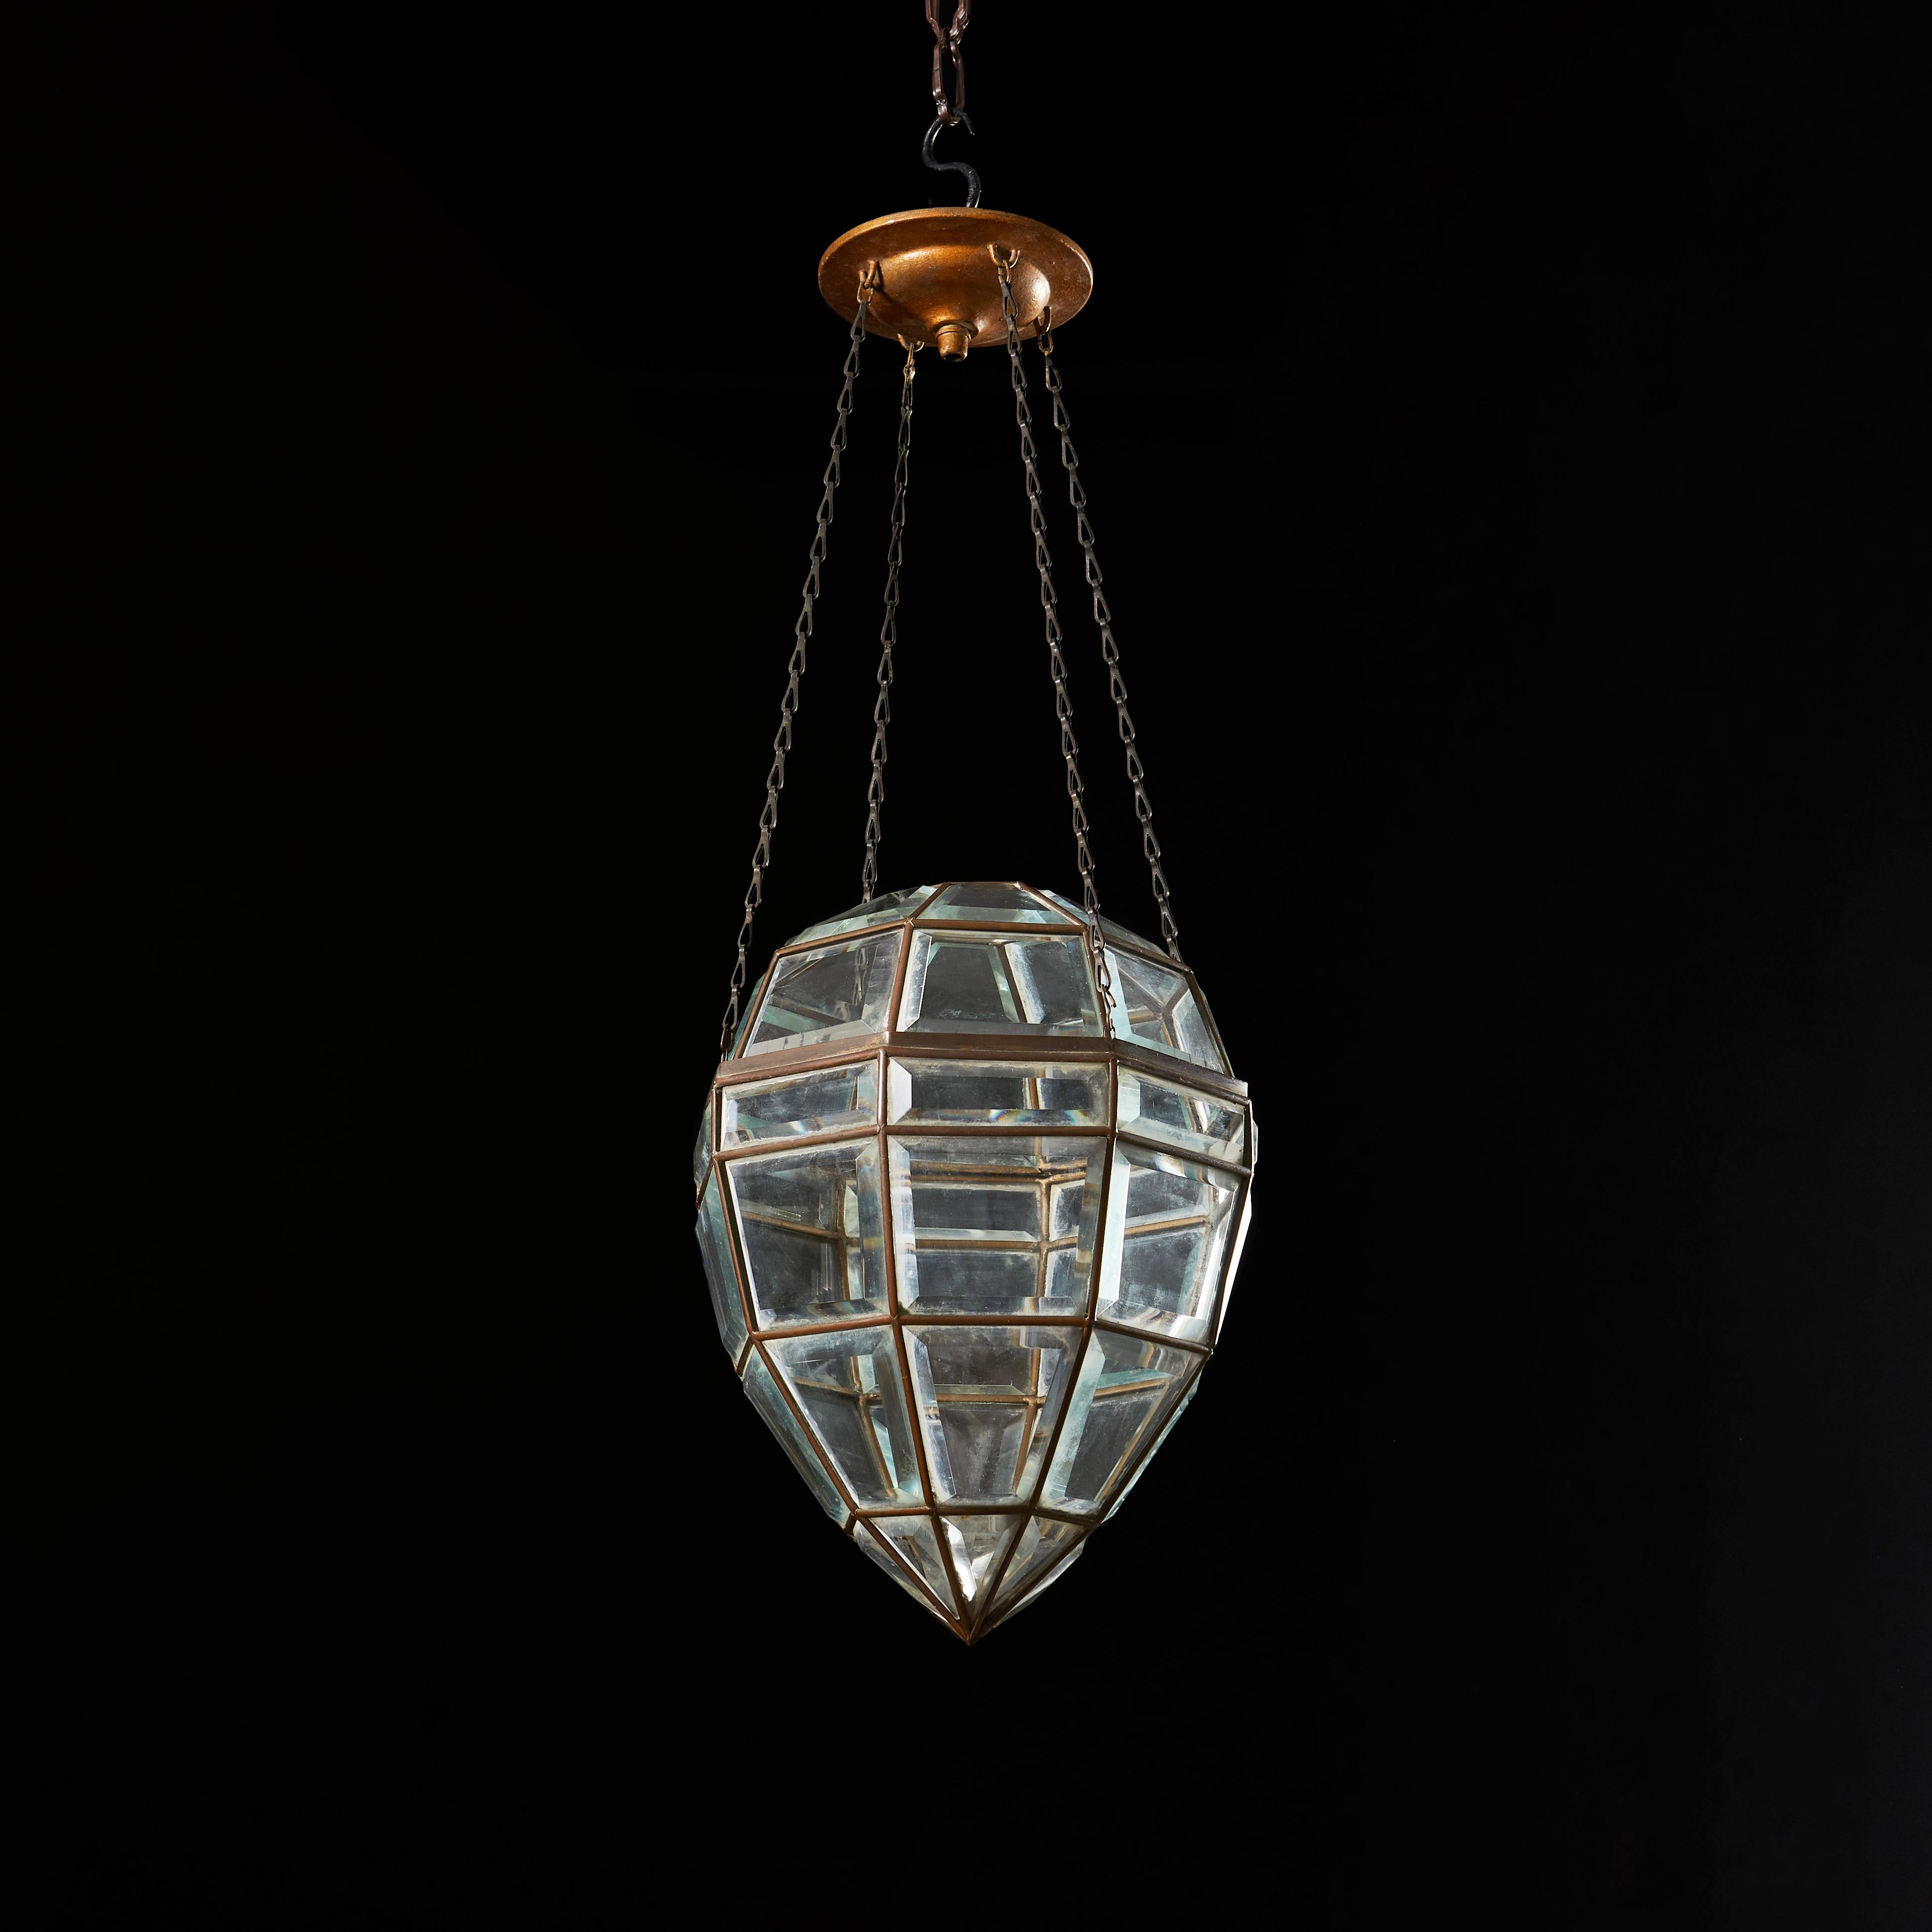 An early twentieth century glass pendant light in the form of a cut diamond, each panel of glass with beveled edges, sitting within a leaded frame.

Currently wired for the UK.

Measures: Height of pendant 32.00cm
Overall height 60.00cm.